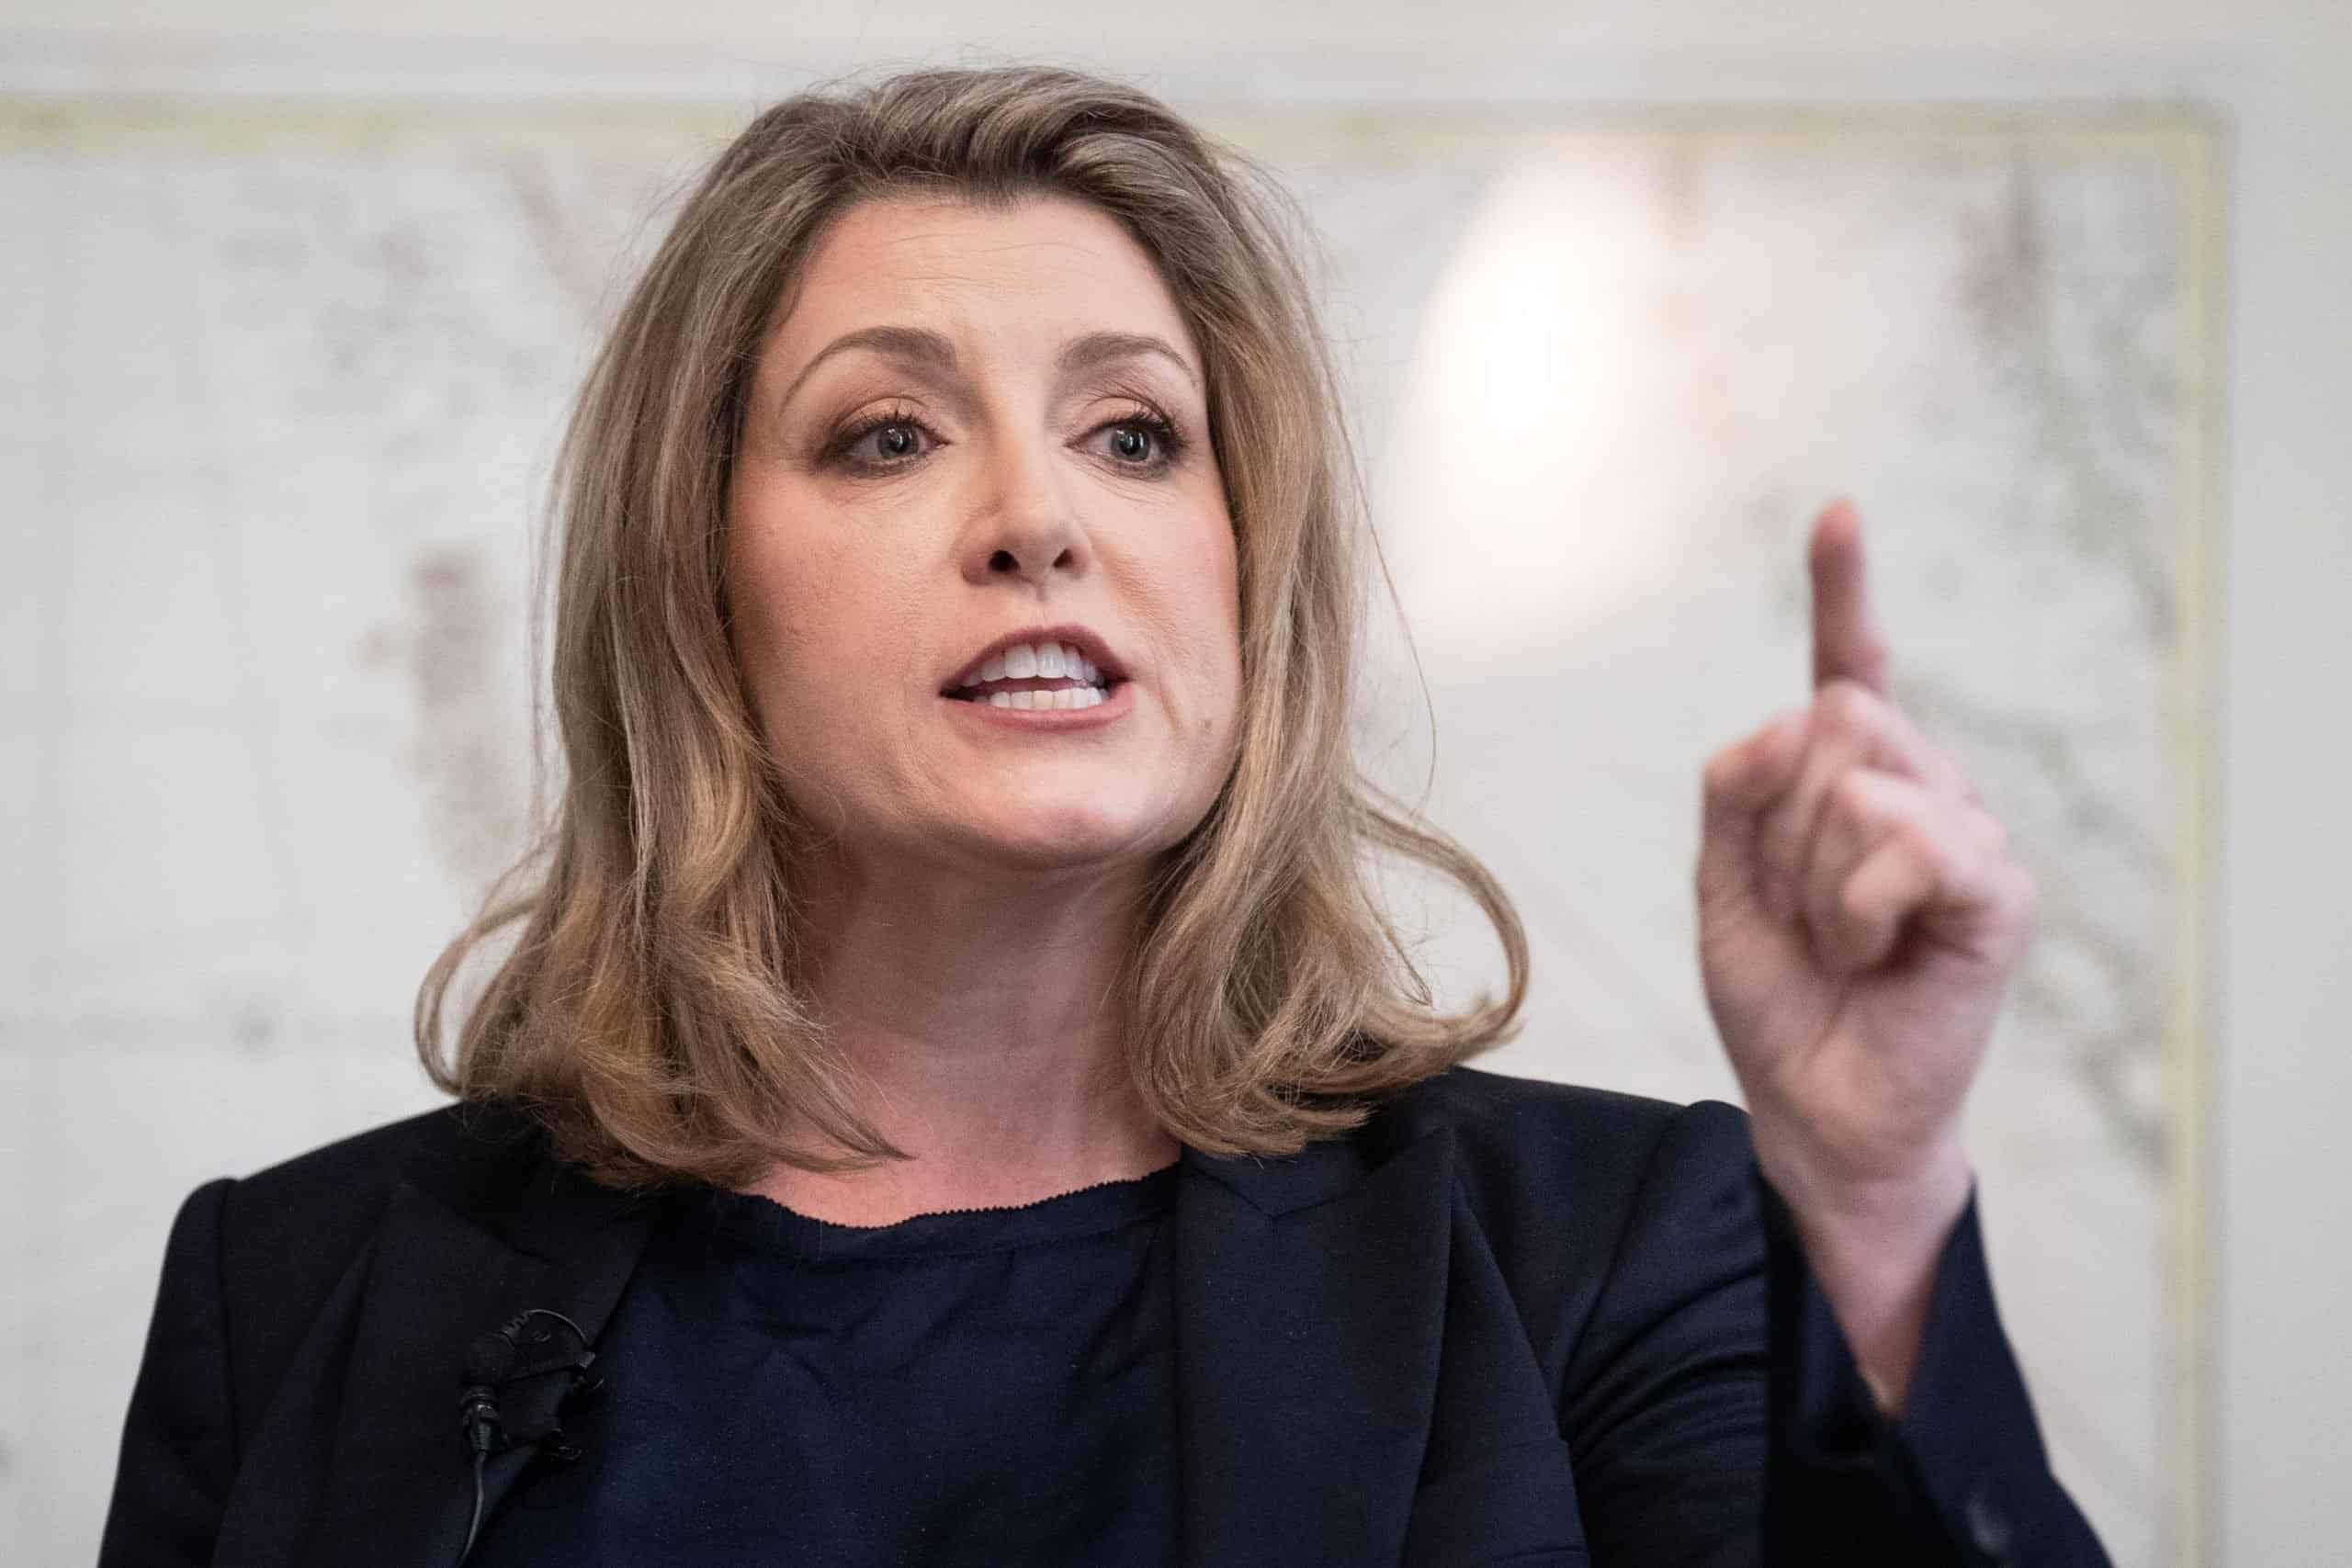 Watch: Mordaunt called out over comments about Turkey joining EU